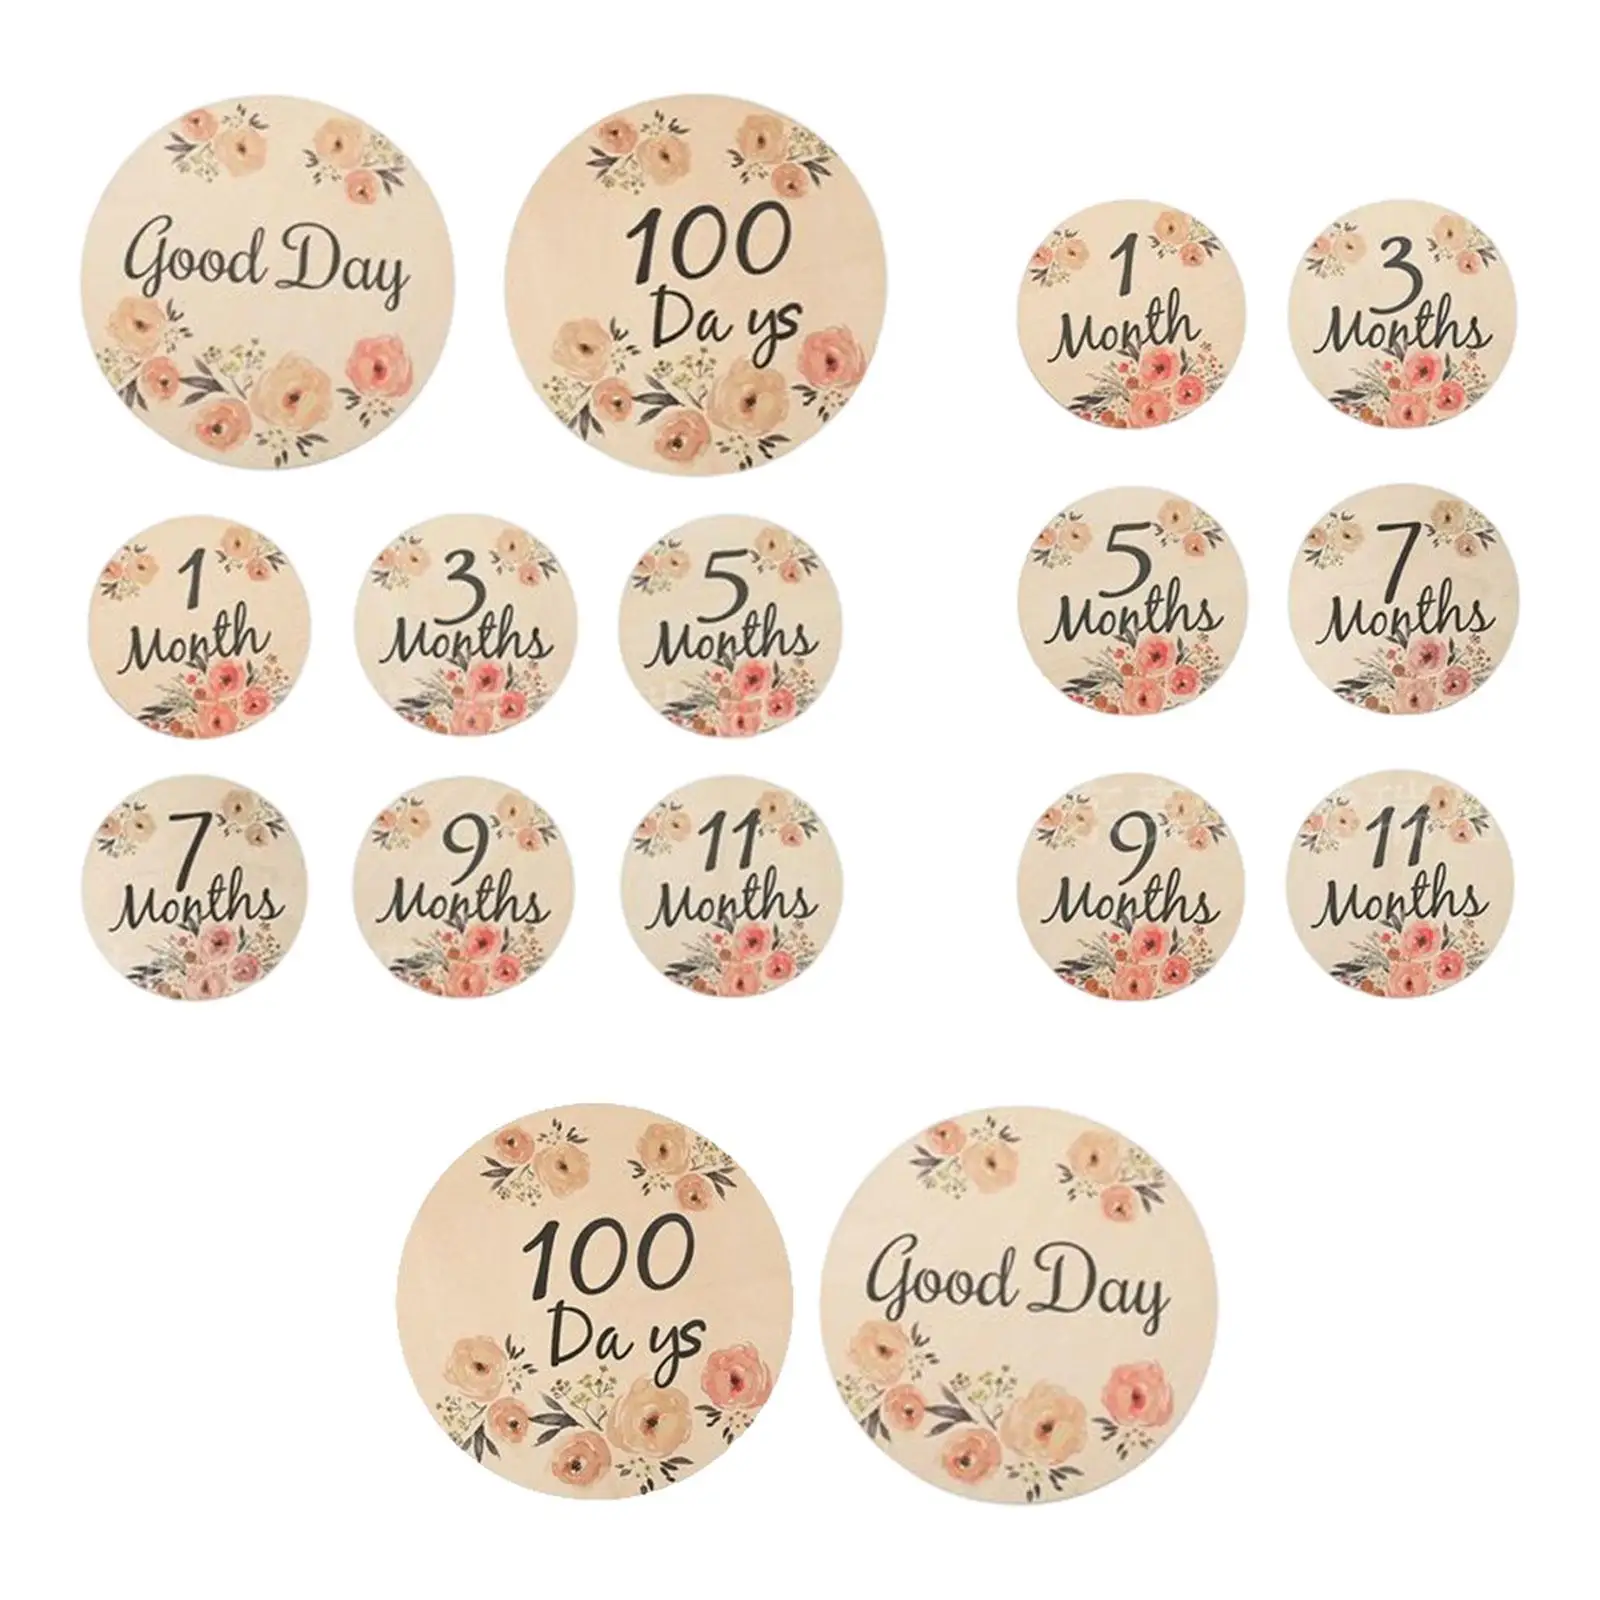 Wooden Baby Milestone Cards Newborn Photoshoot Props Engraved Discs Gifts